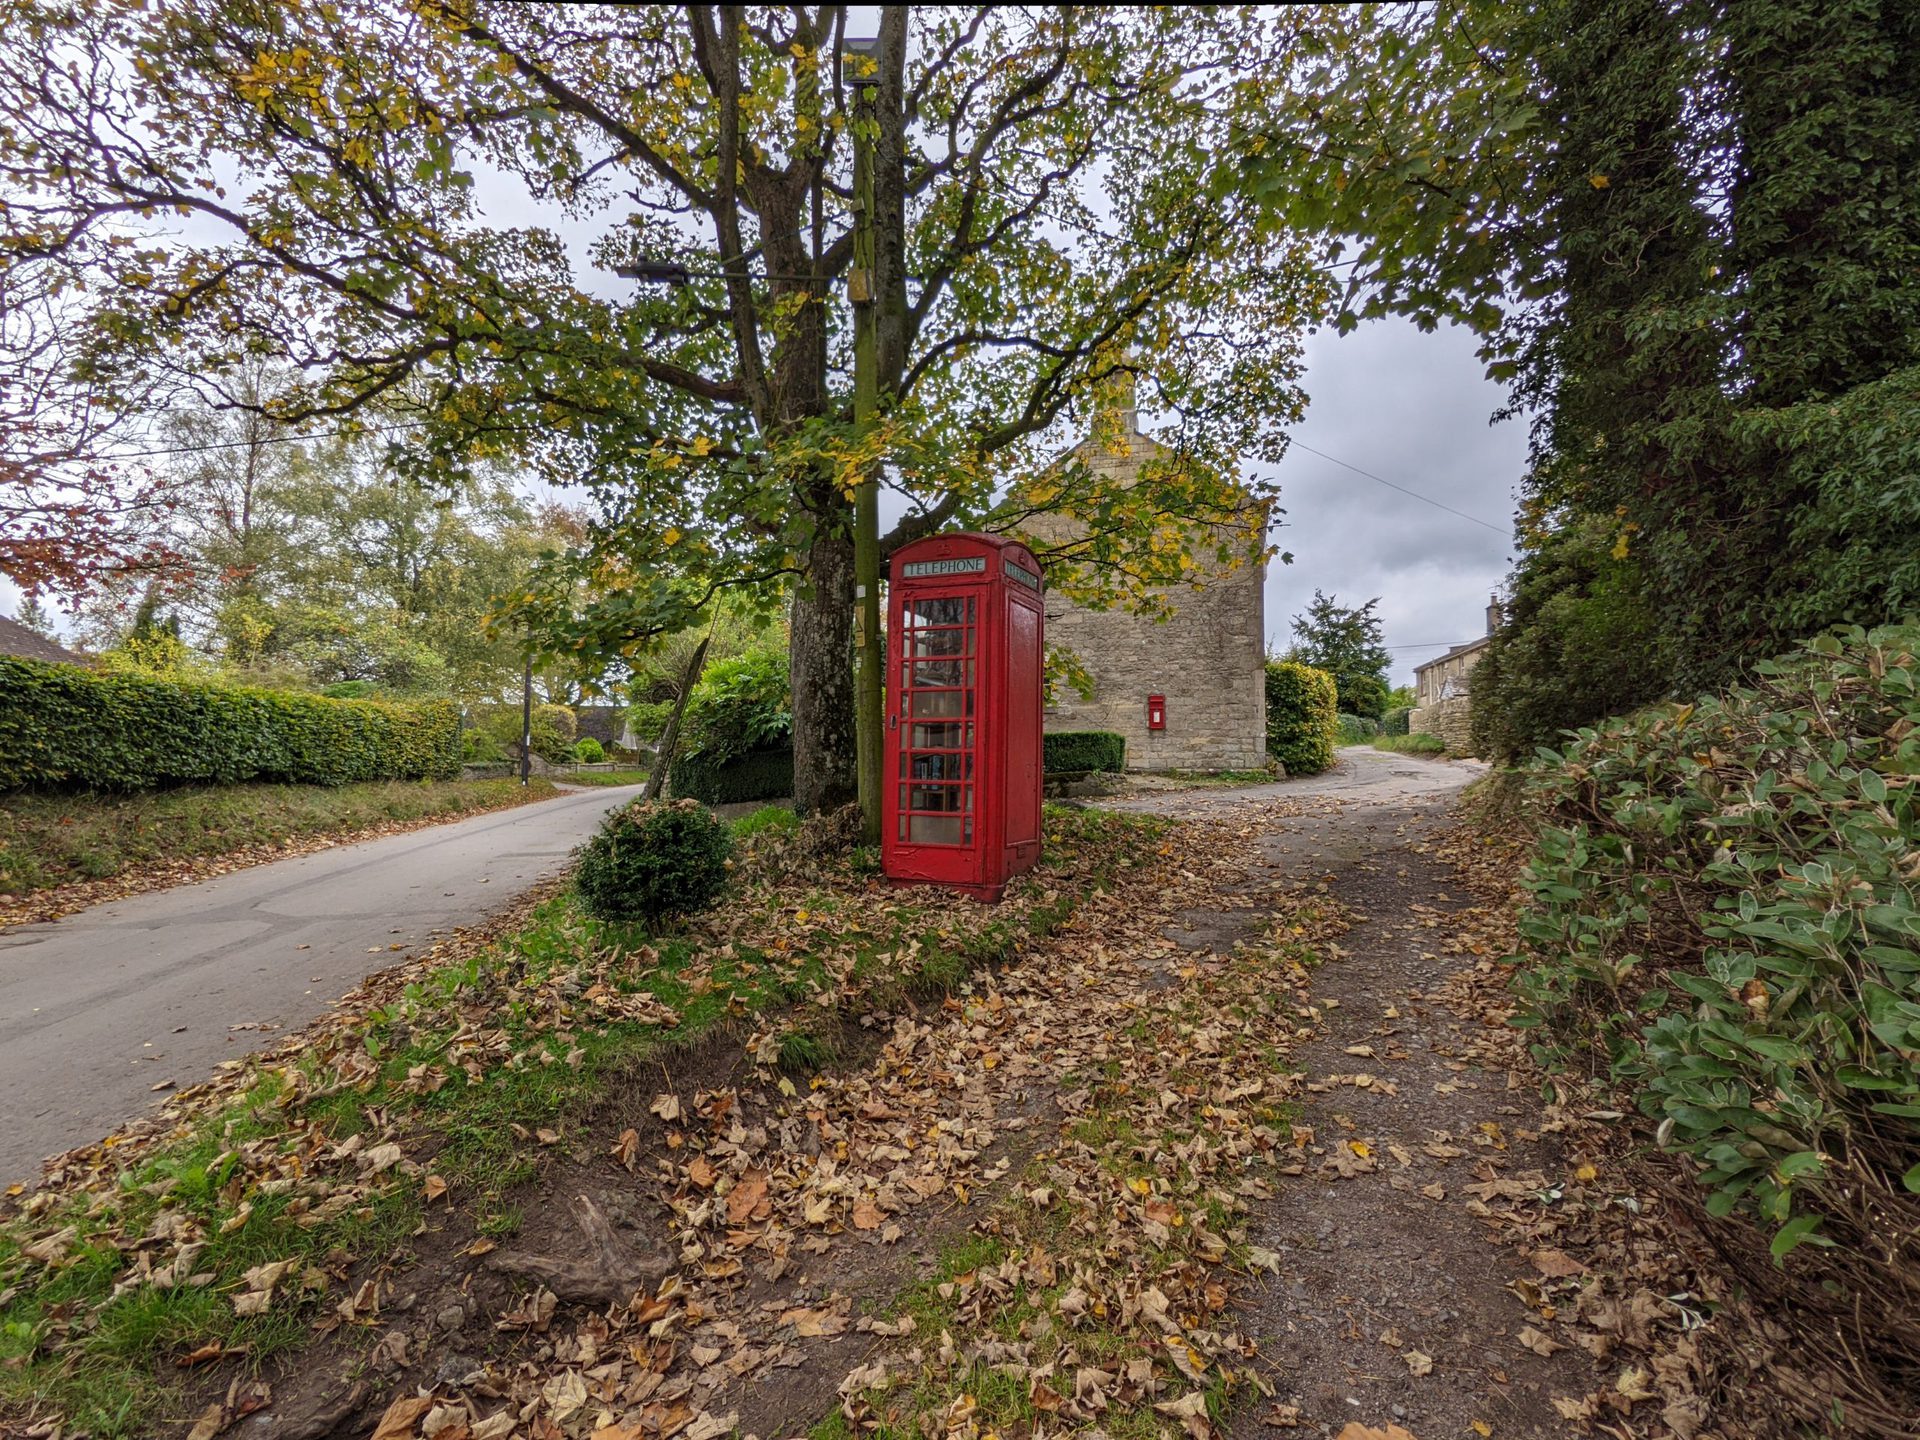 Wide-angle camera sample of red telephone box on a leafy street shot with Google Pixel 5